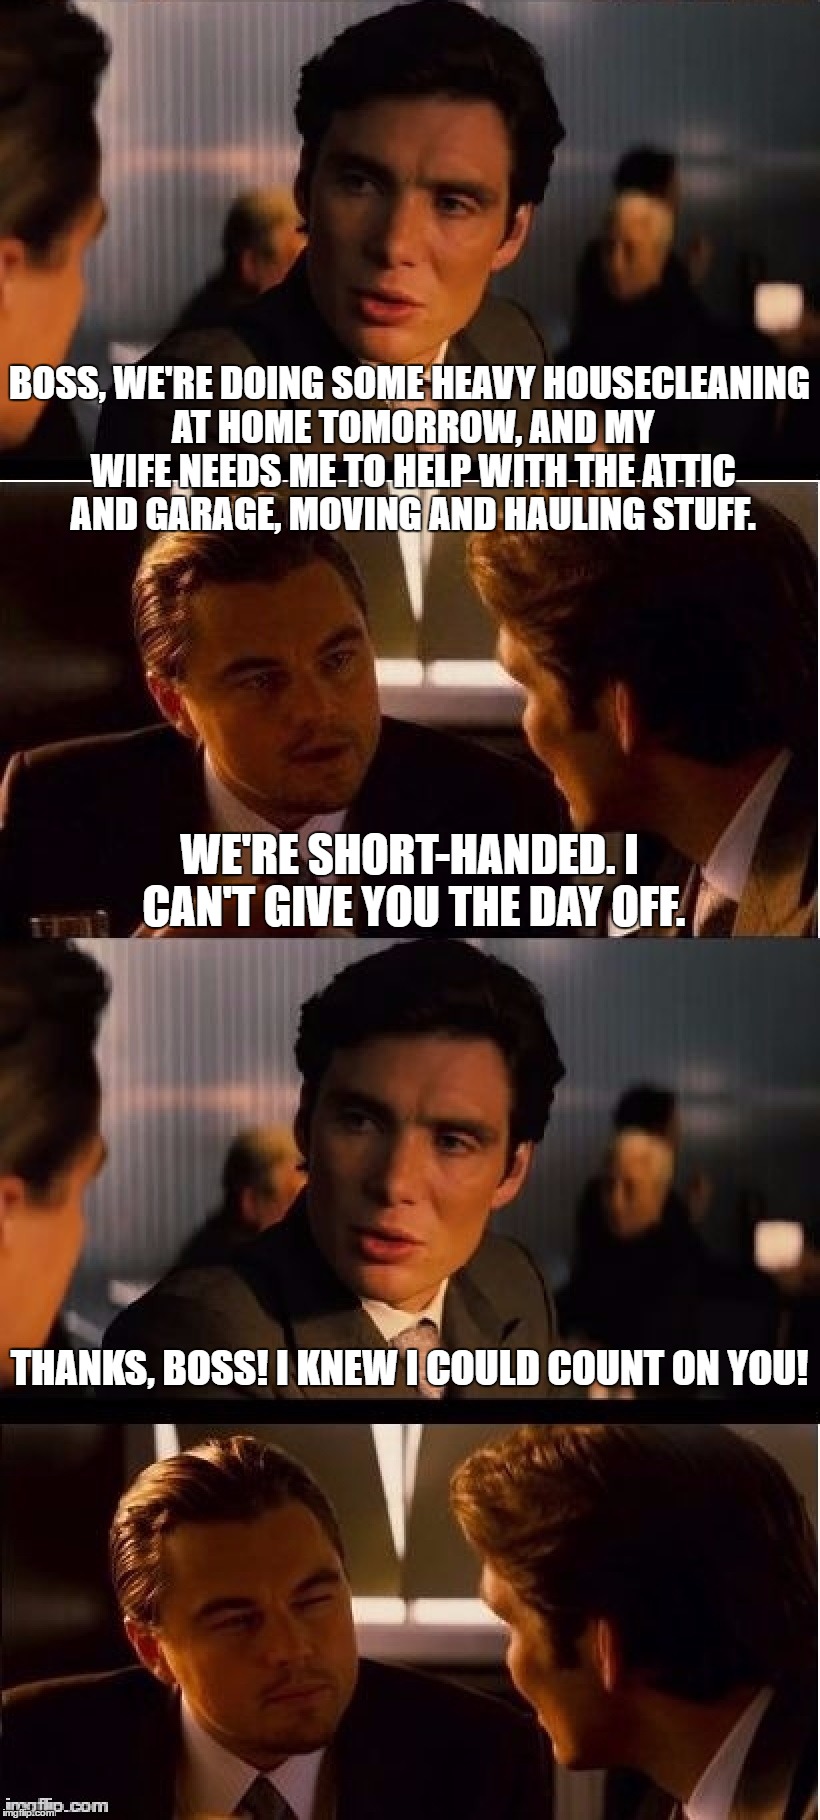 BOSS, WE'RE DOING SOME HEAVY HOUSECLEANING AT HOME TOMORROW, AND MY WIFE NEEDS ME TO HELP WITH THE ATTIC AND GARAGE, MOVING AND HAULING STUFF. WE'RE SHORT-HANDED. I CAN'T GIVE YOU THE DAY OFF. THANKS, BOSS! I KNEW I COULD COUNT ON YOU! | image tagged in seasick inception double size | made w/ Imgflip meme maker